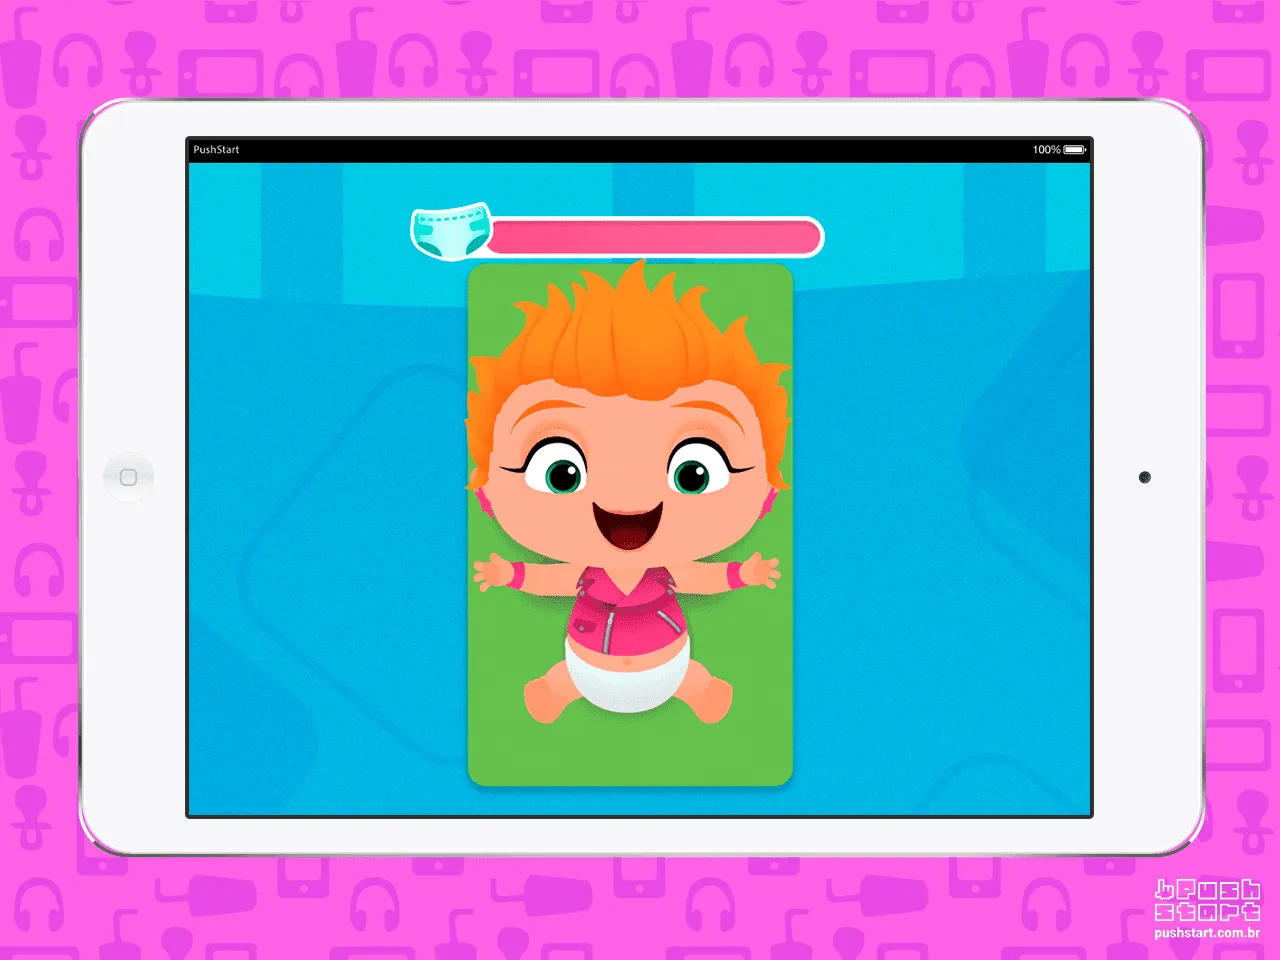 Poject - <p>A game based on Mini Beat Power Rockers, an Argentinian animated show. The player needs to help Dolores, the nanny, to become a five star babysitter in five distinct missions. <strong>Available on Discovery Kids Plus. </strong></p>